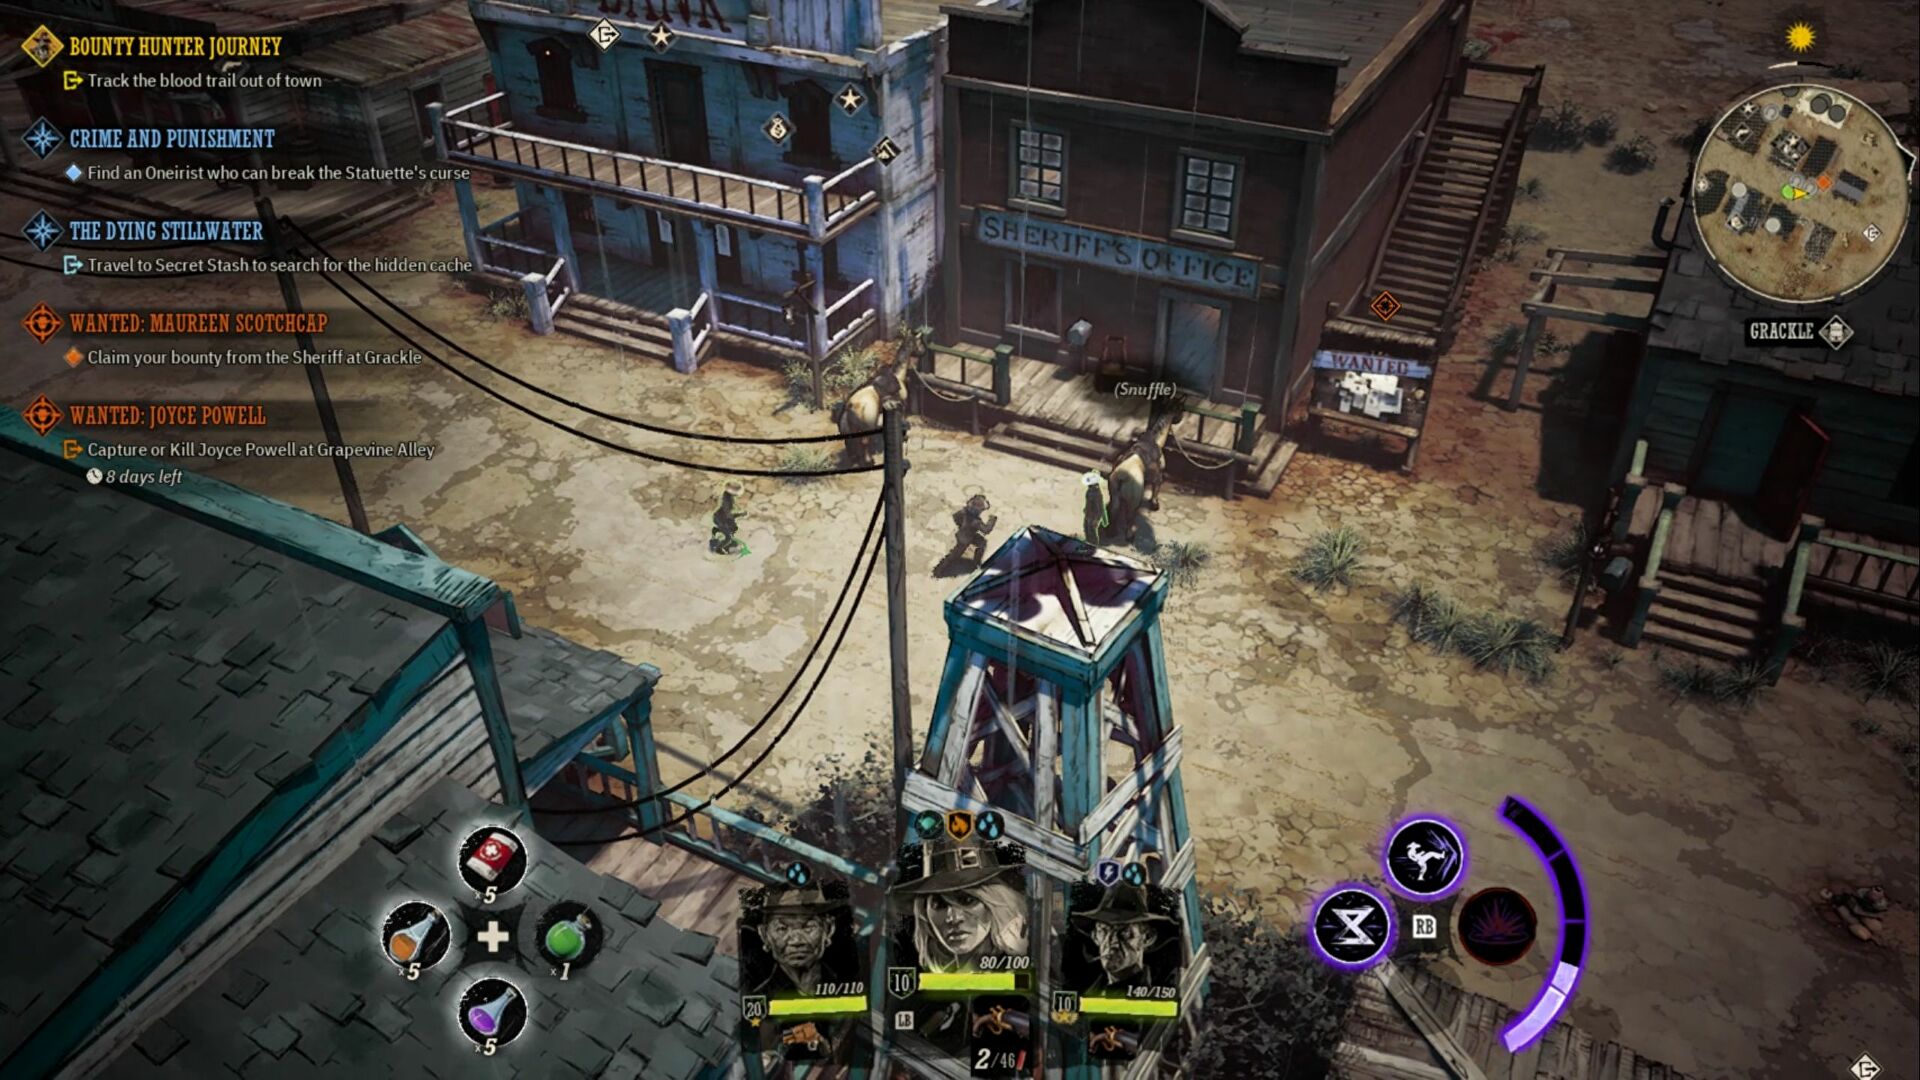 Weird West is getting permadeath and a new aiming mode in its next patch